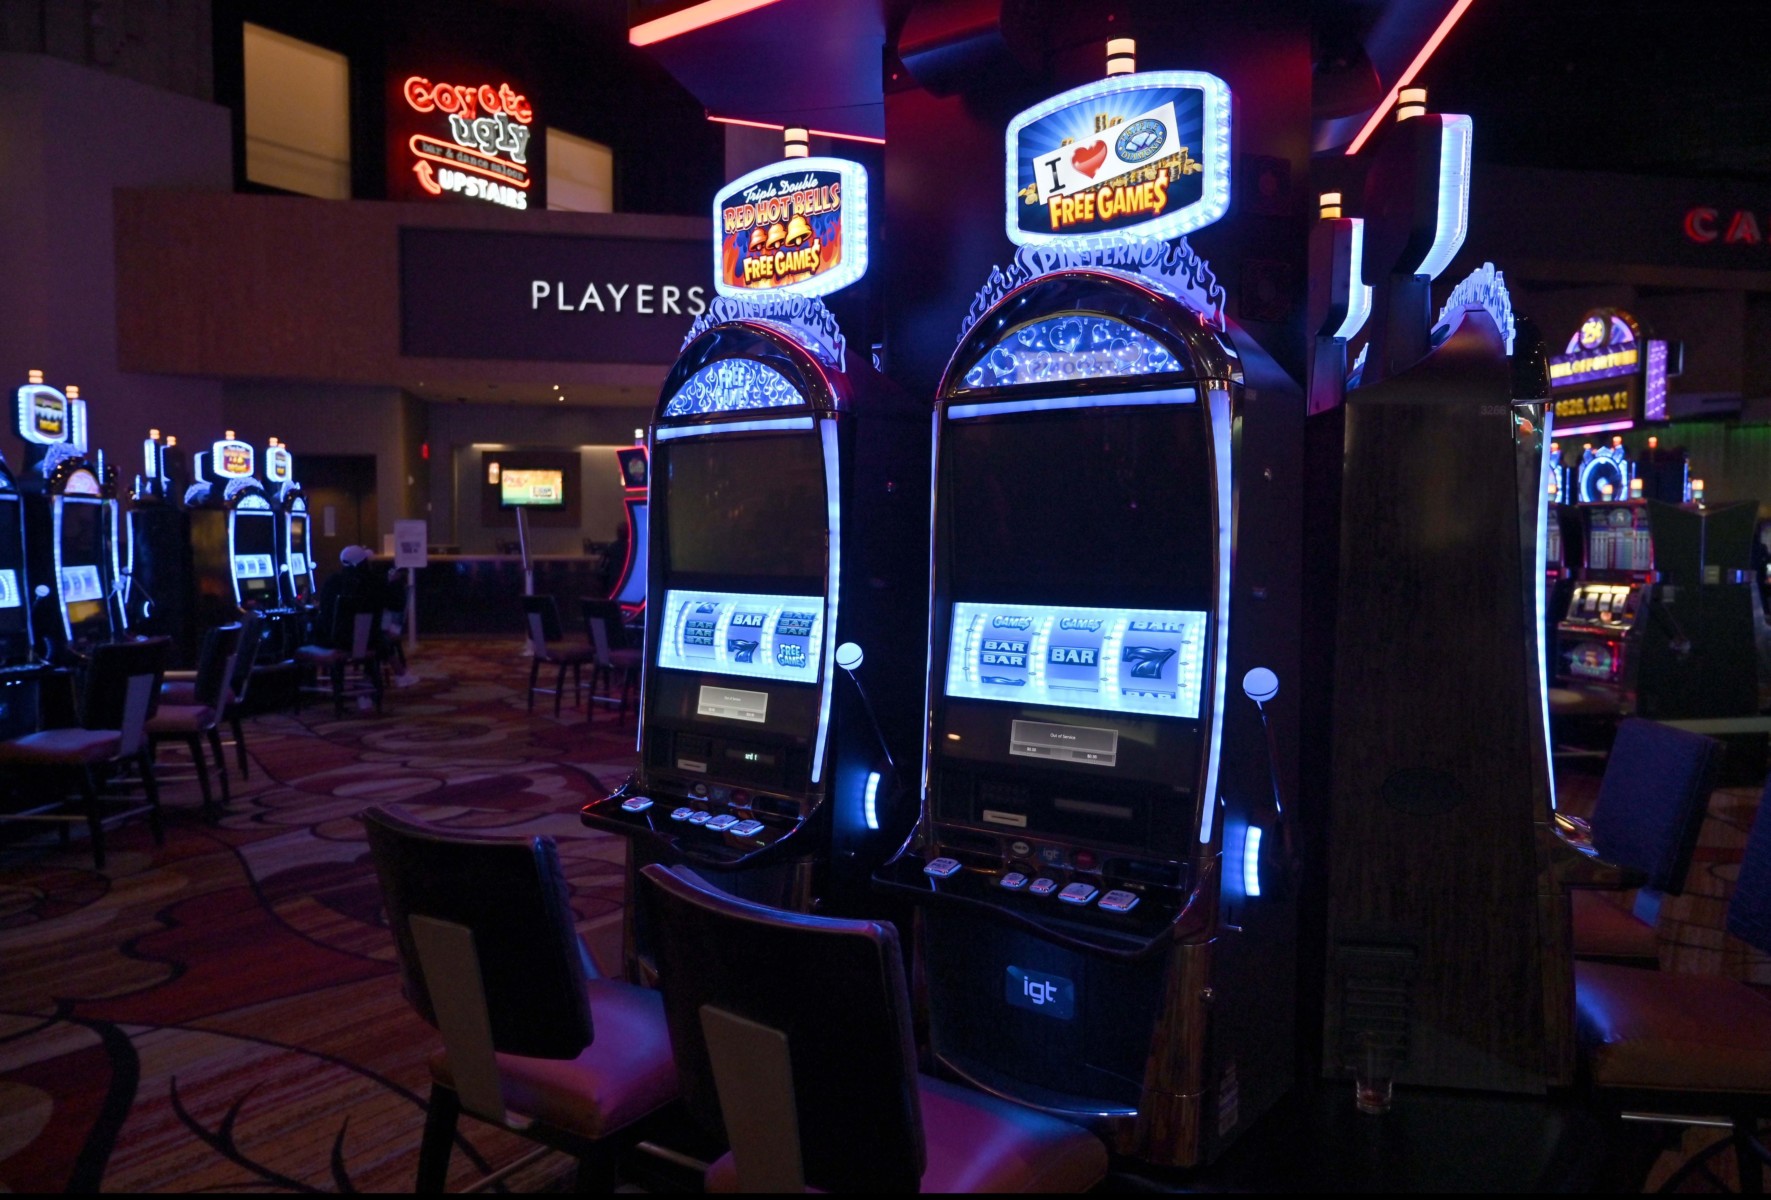 A Las Vegas casino normally teeming with life is vacant